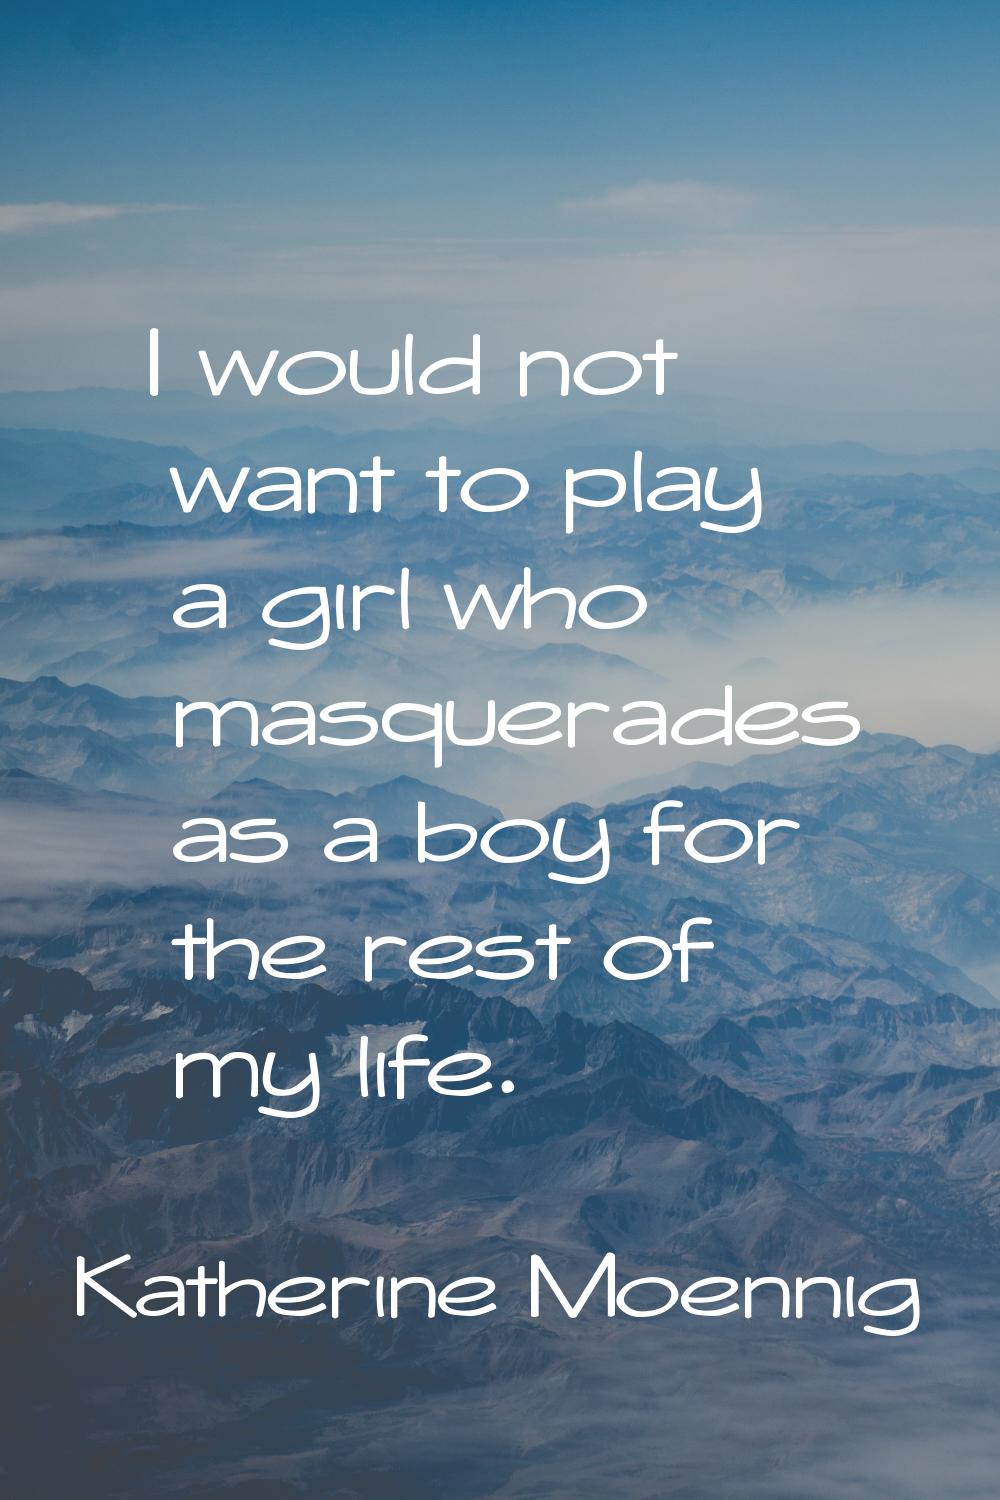 I would not want to play a girl who masquerades as a boy for the rest of my life.